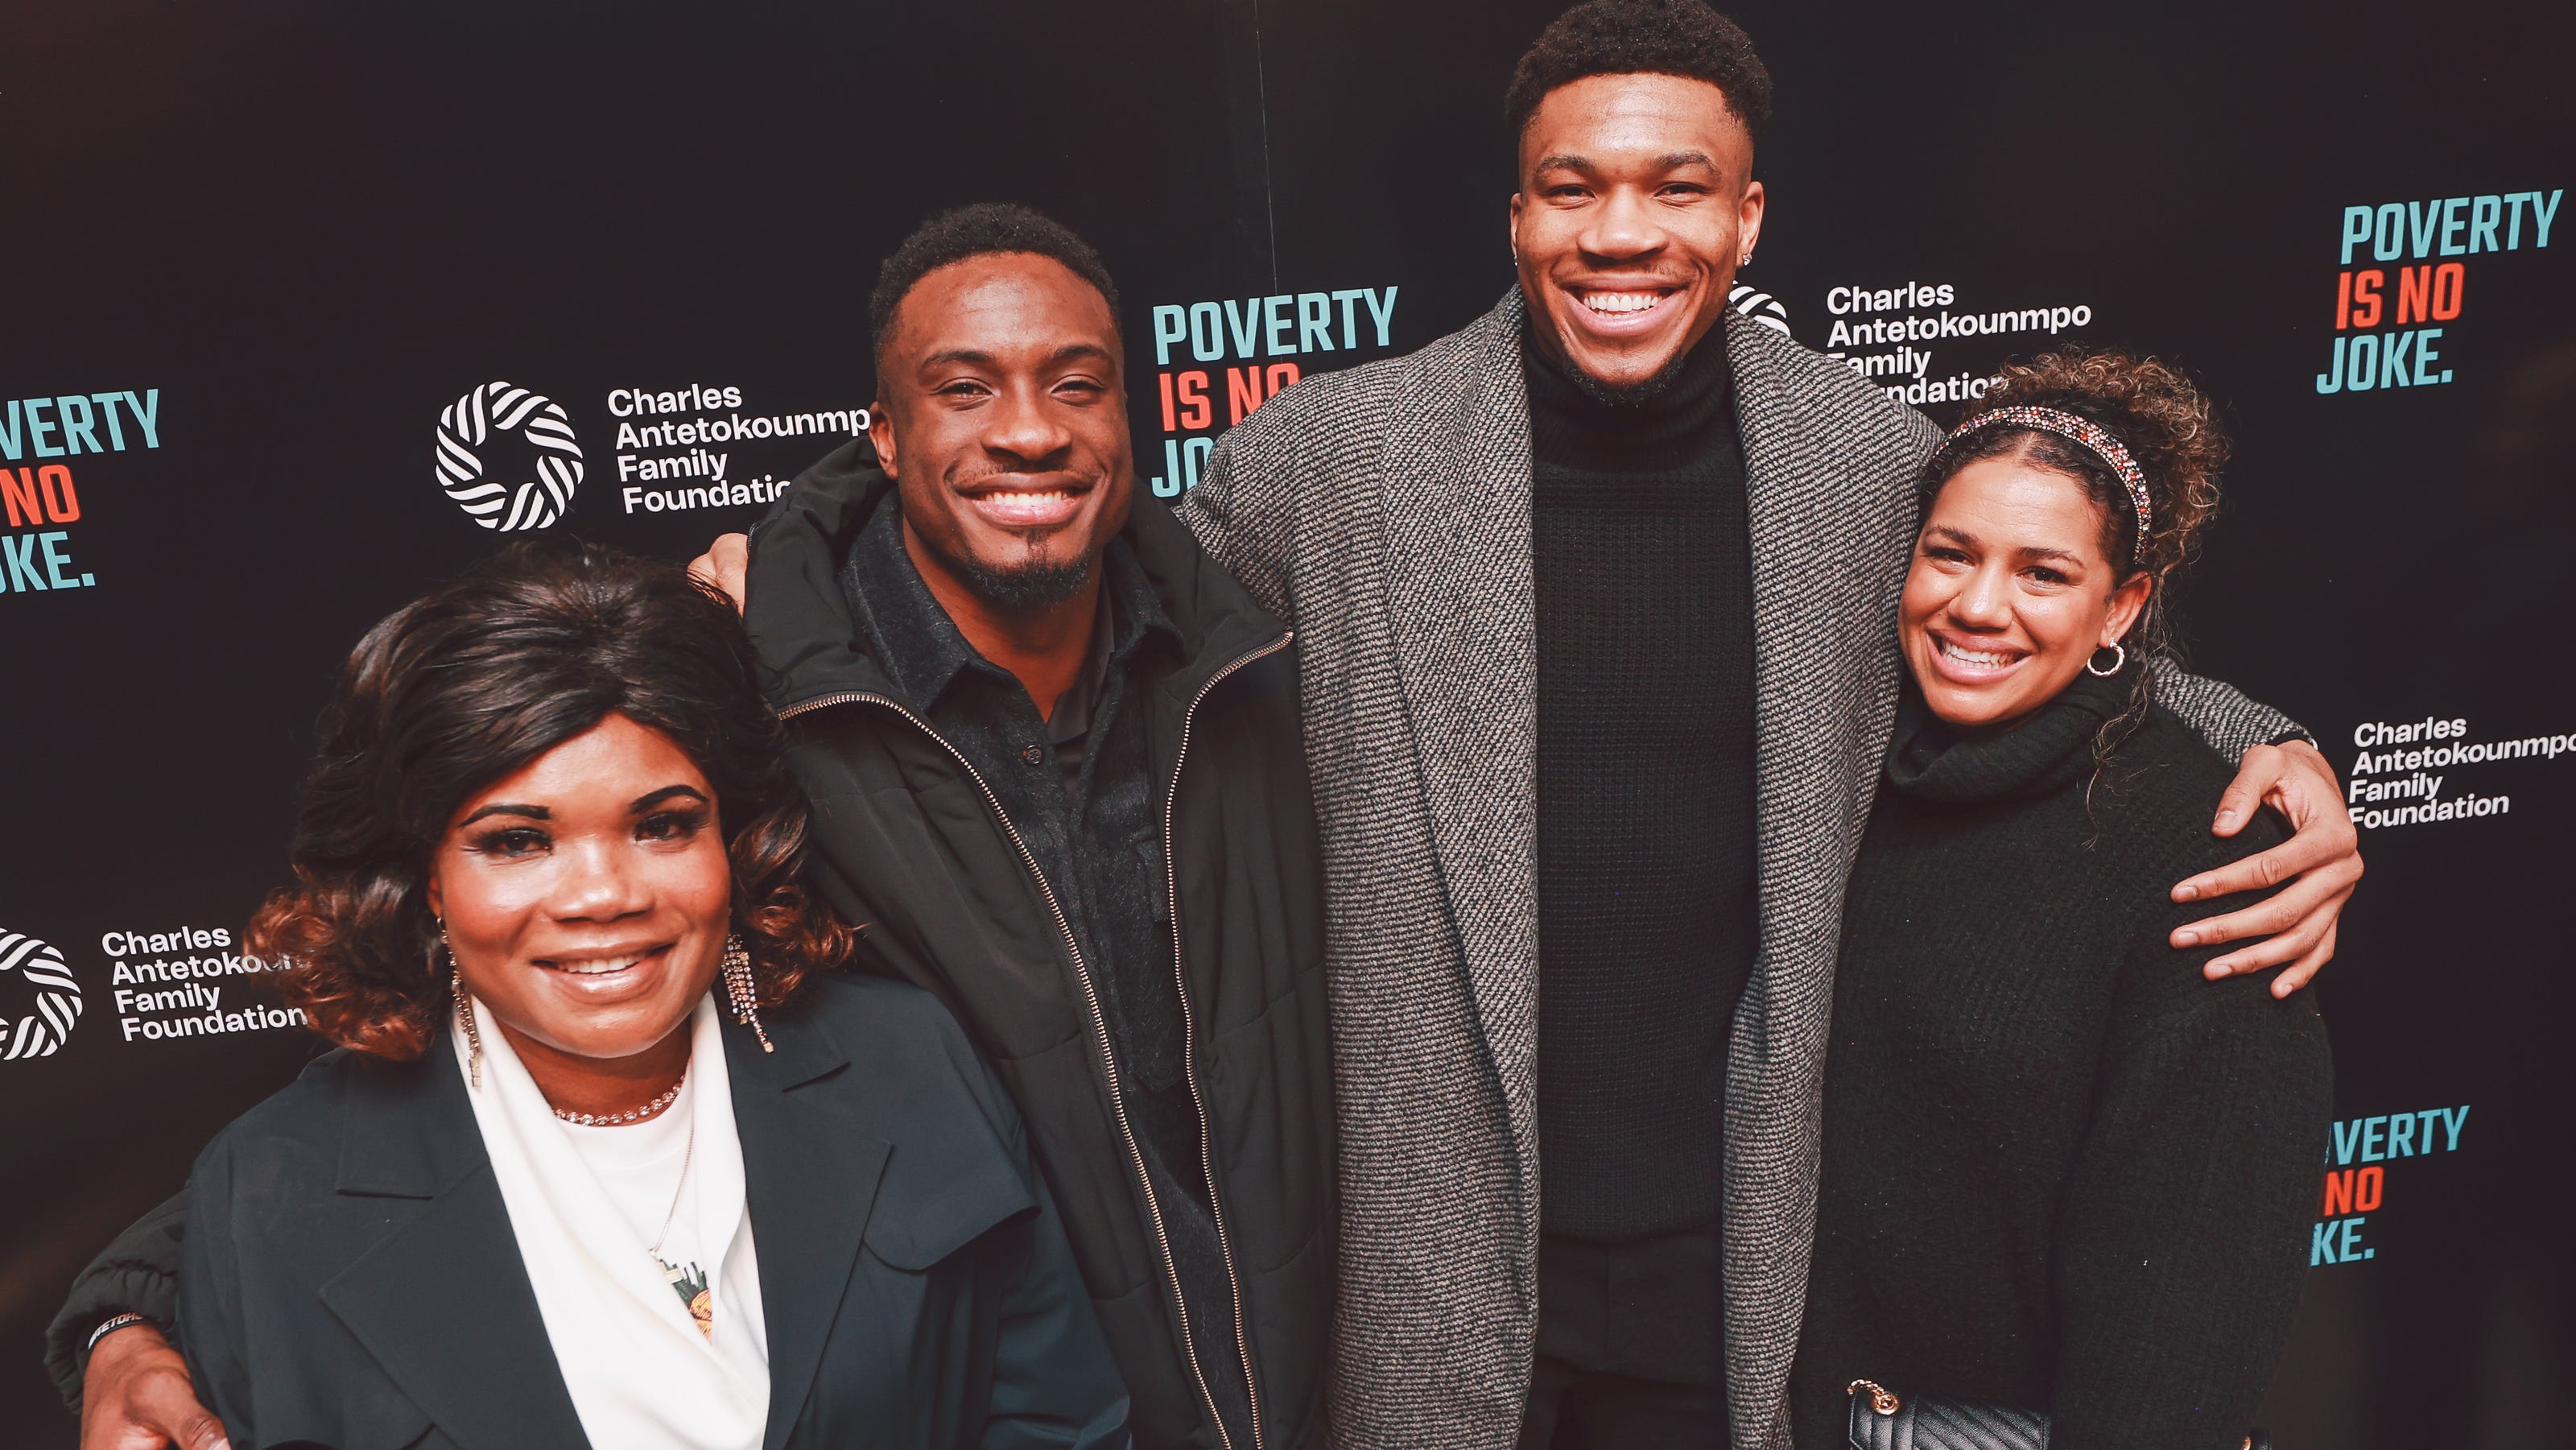 Giannis' foundation provides many different types of support